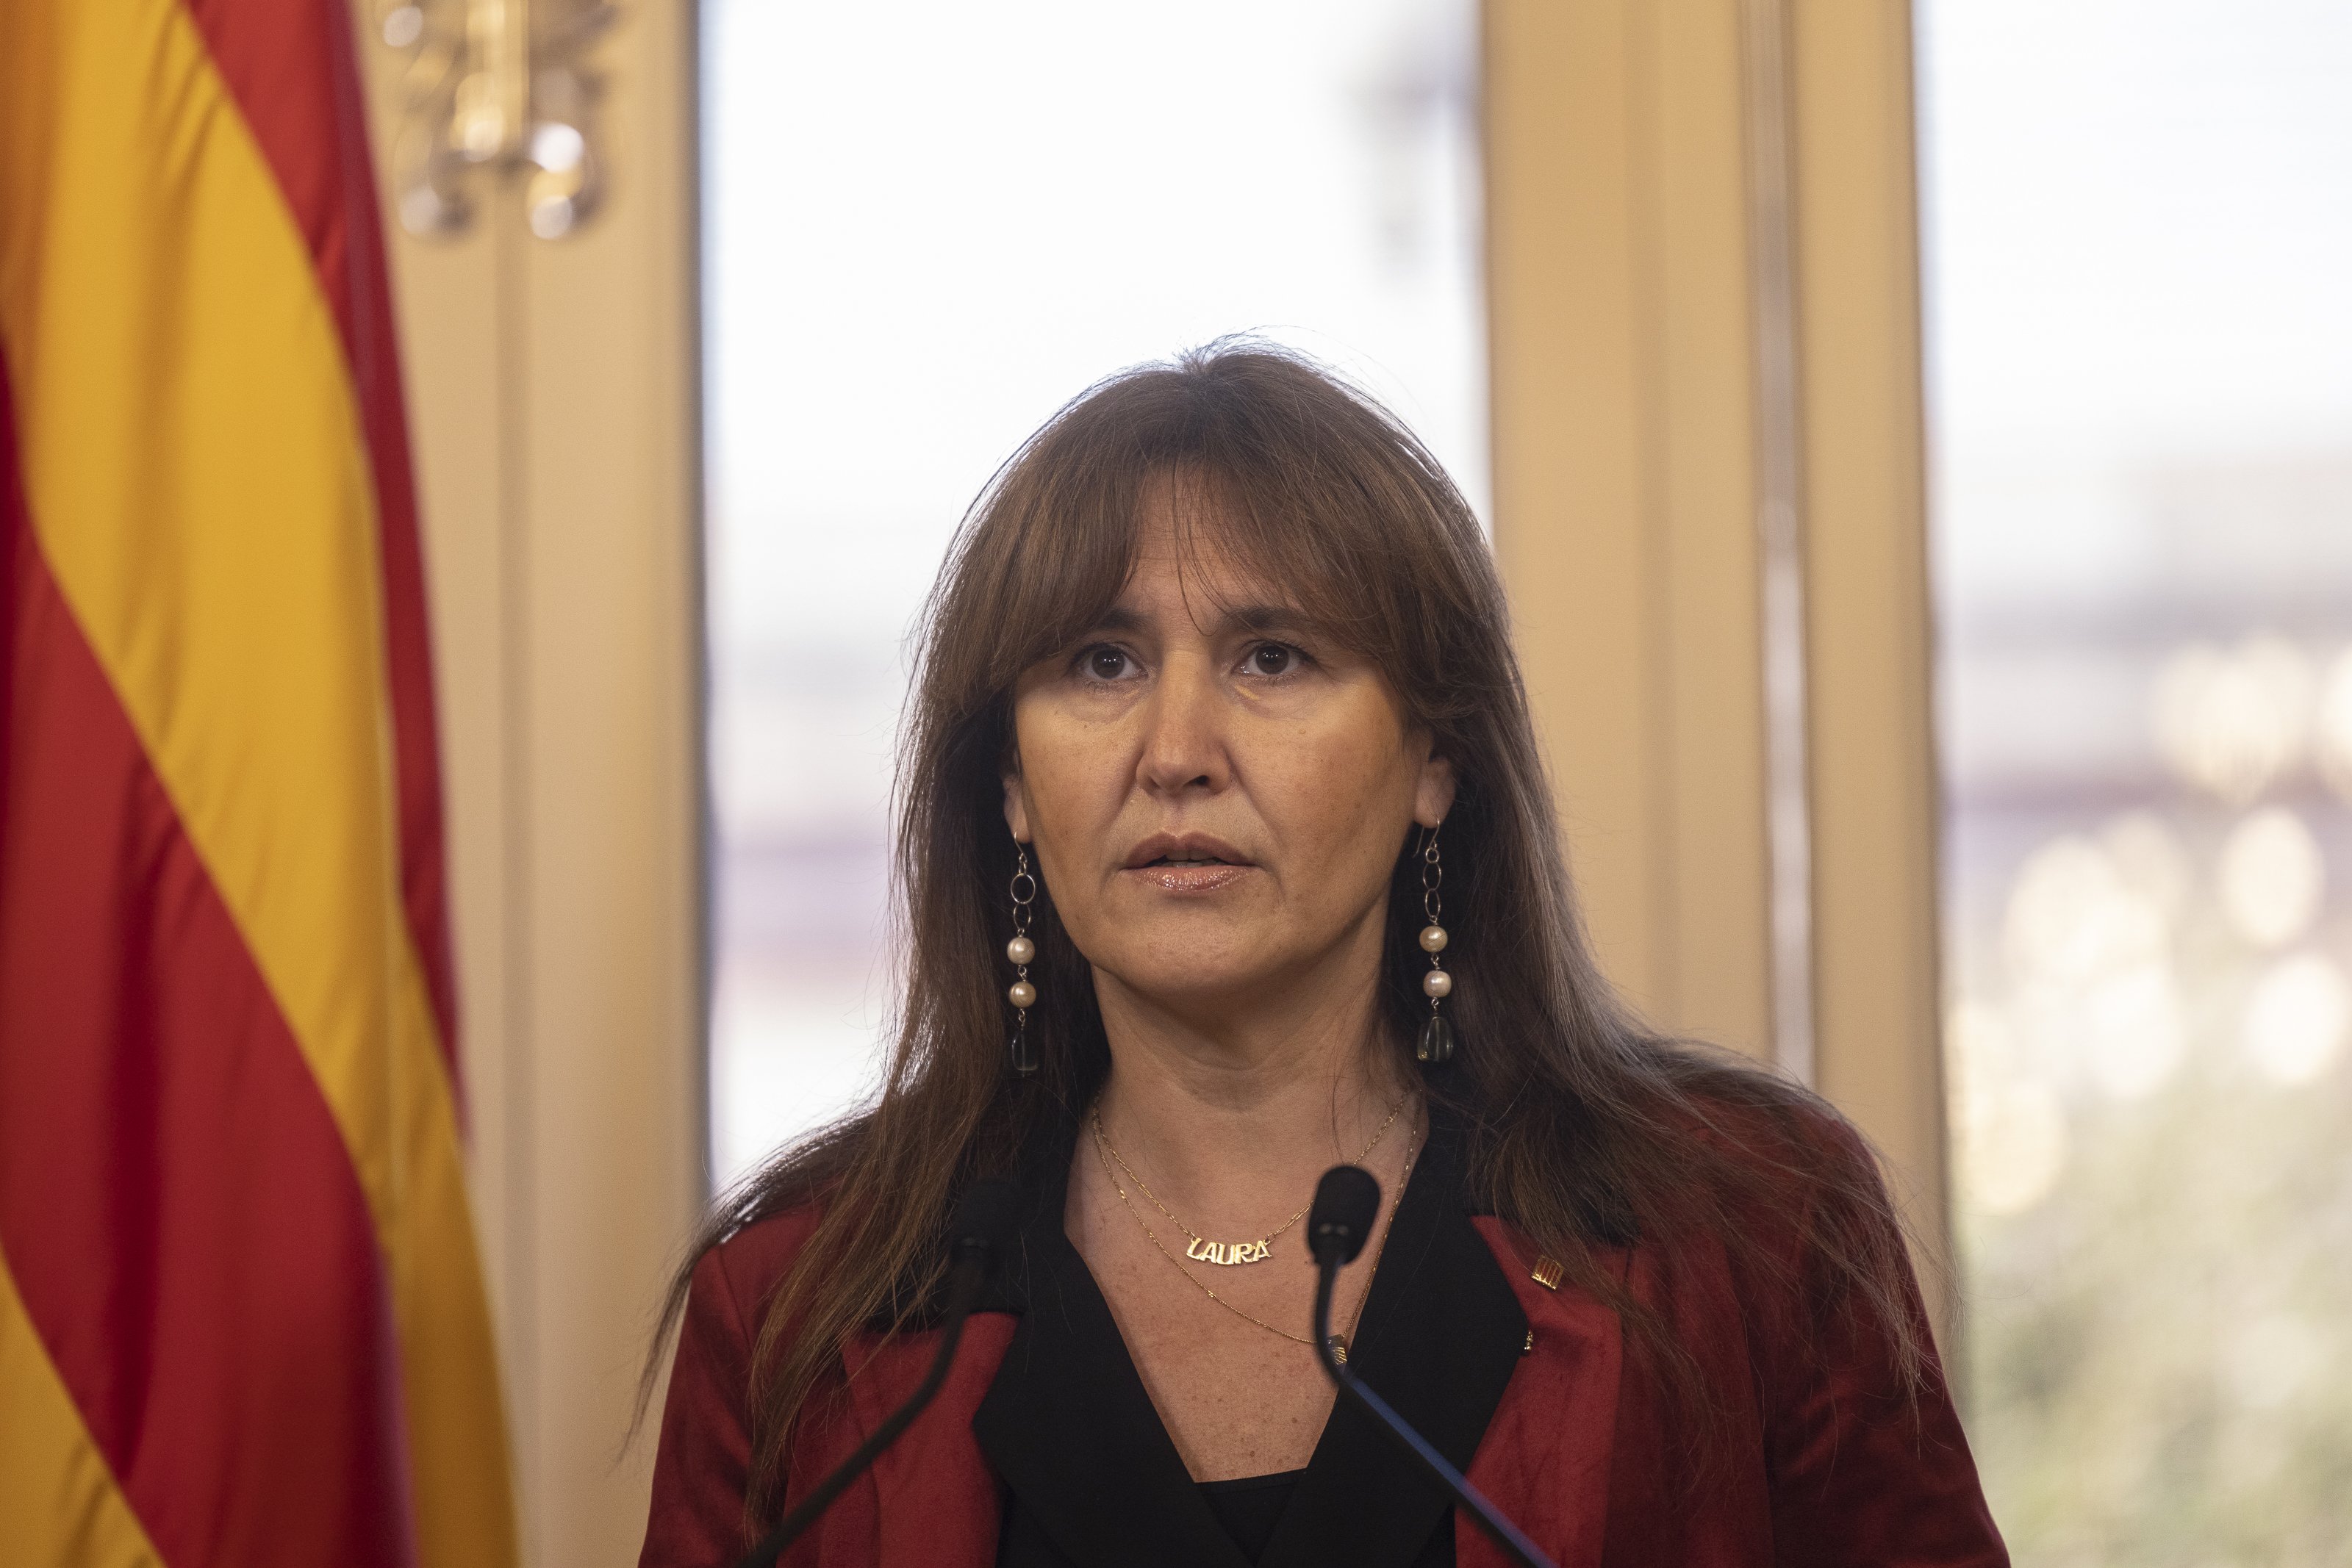 With Juvillà now an ex-MP, Catalan speaker Borràs denies claims of opacity